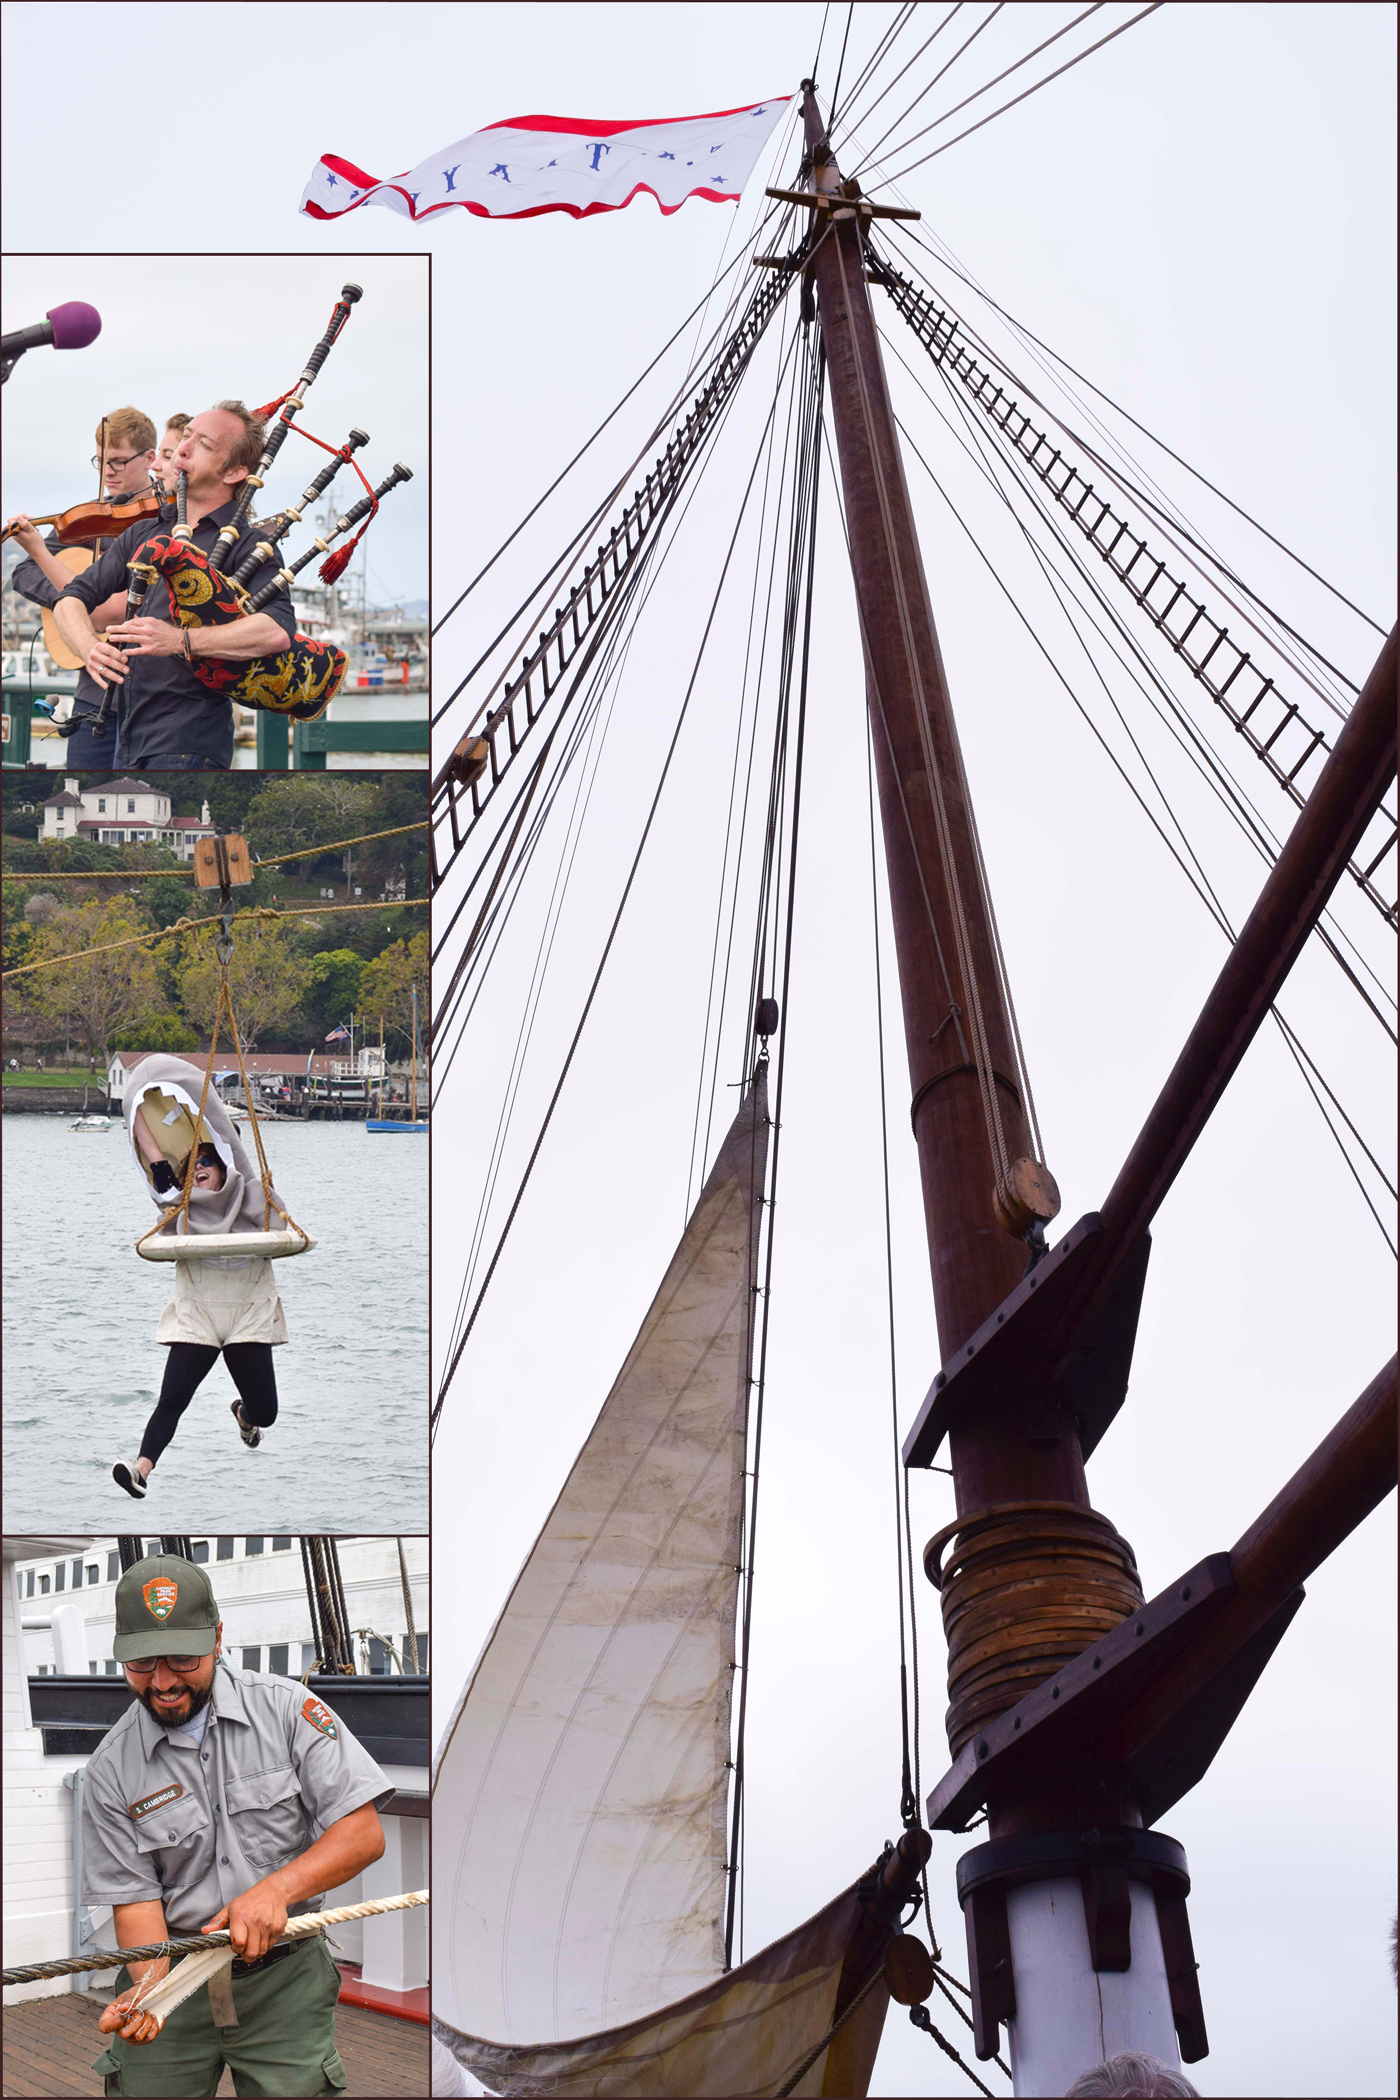 Four photos: man wrapping wire rope, woman hanging over the water, bagpipers playing and a tall ship's mast.